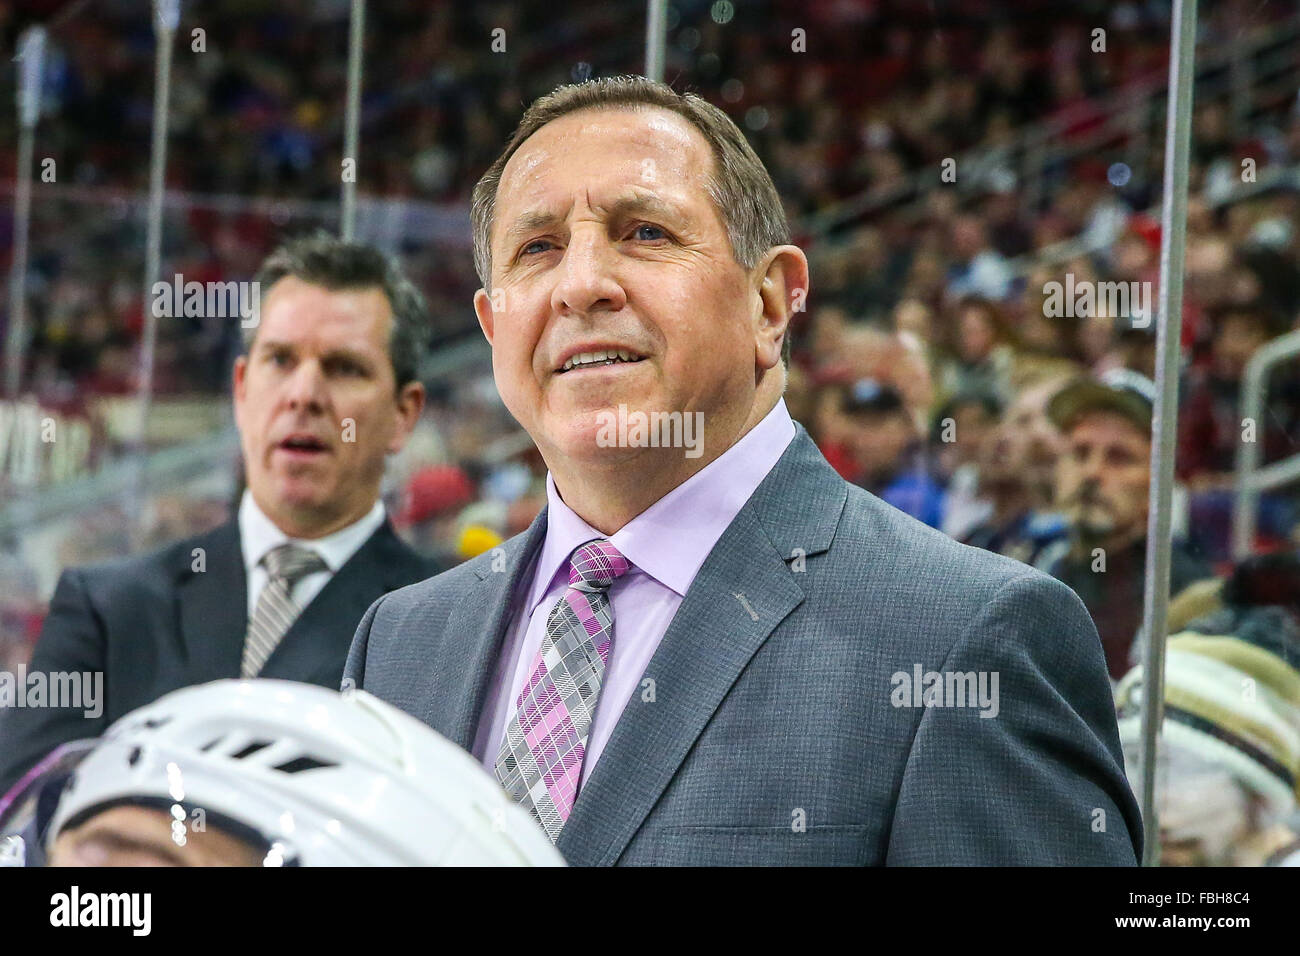 Pittsburgh Penguins assistant coach Jacques Martin during the NHL game between the Pittsburgh Penguins and the Carolina Hurricanes at the PNC Arena. Stock Photo